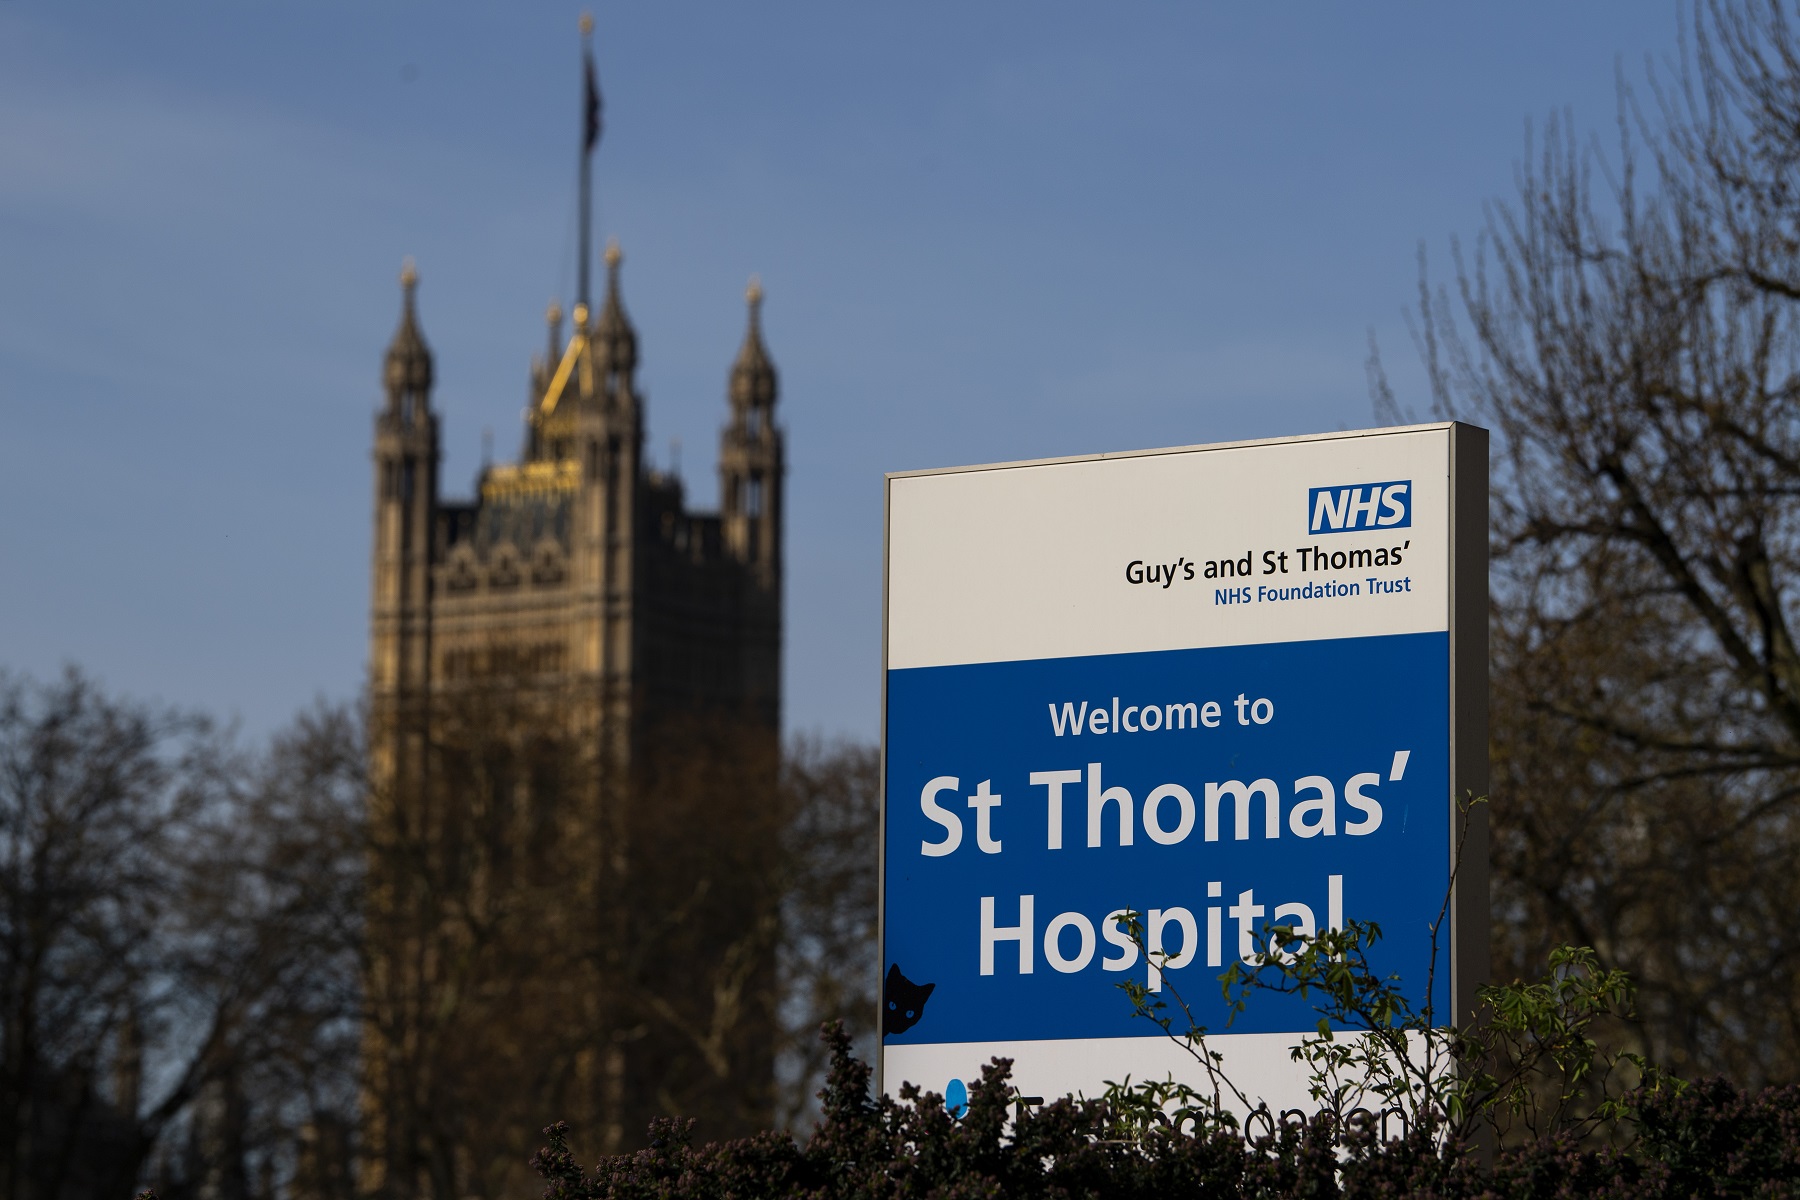 LONDON, ENGLAND - APRIL 07: A sign for St Thomas' Hospital is seen in front of the Houses of Parliament on April 07, 2020 in London, England. Prime Minister Boris Johnson was transferred to the intensive care unit at St Thomas' Hospital after his coronavirus symptoms worsened last night. (Photo by Justin Setterfield/Getty Images)